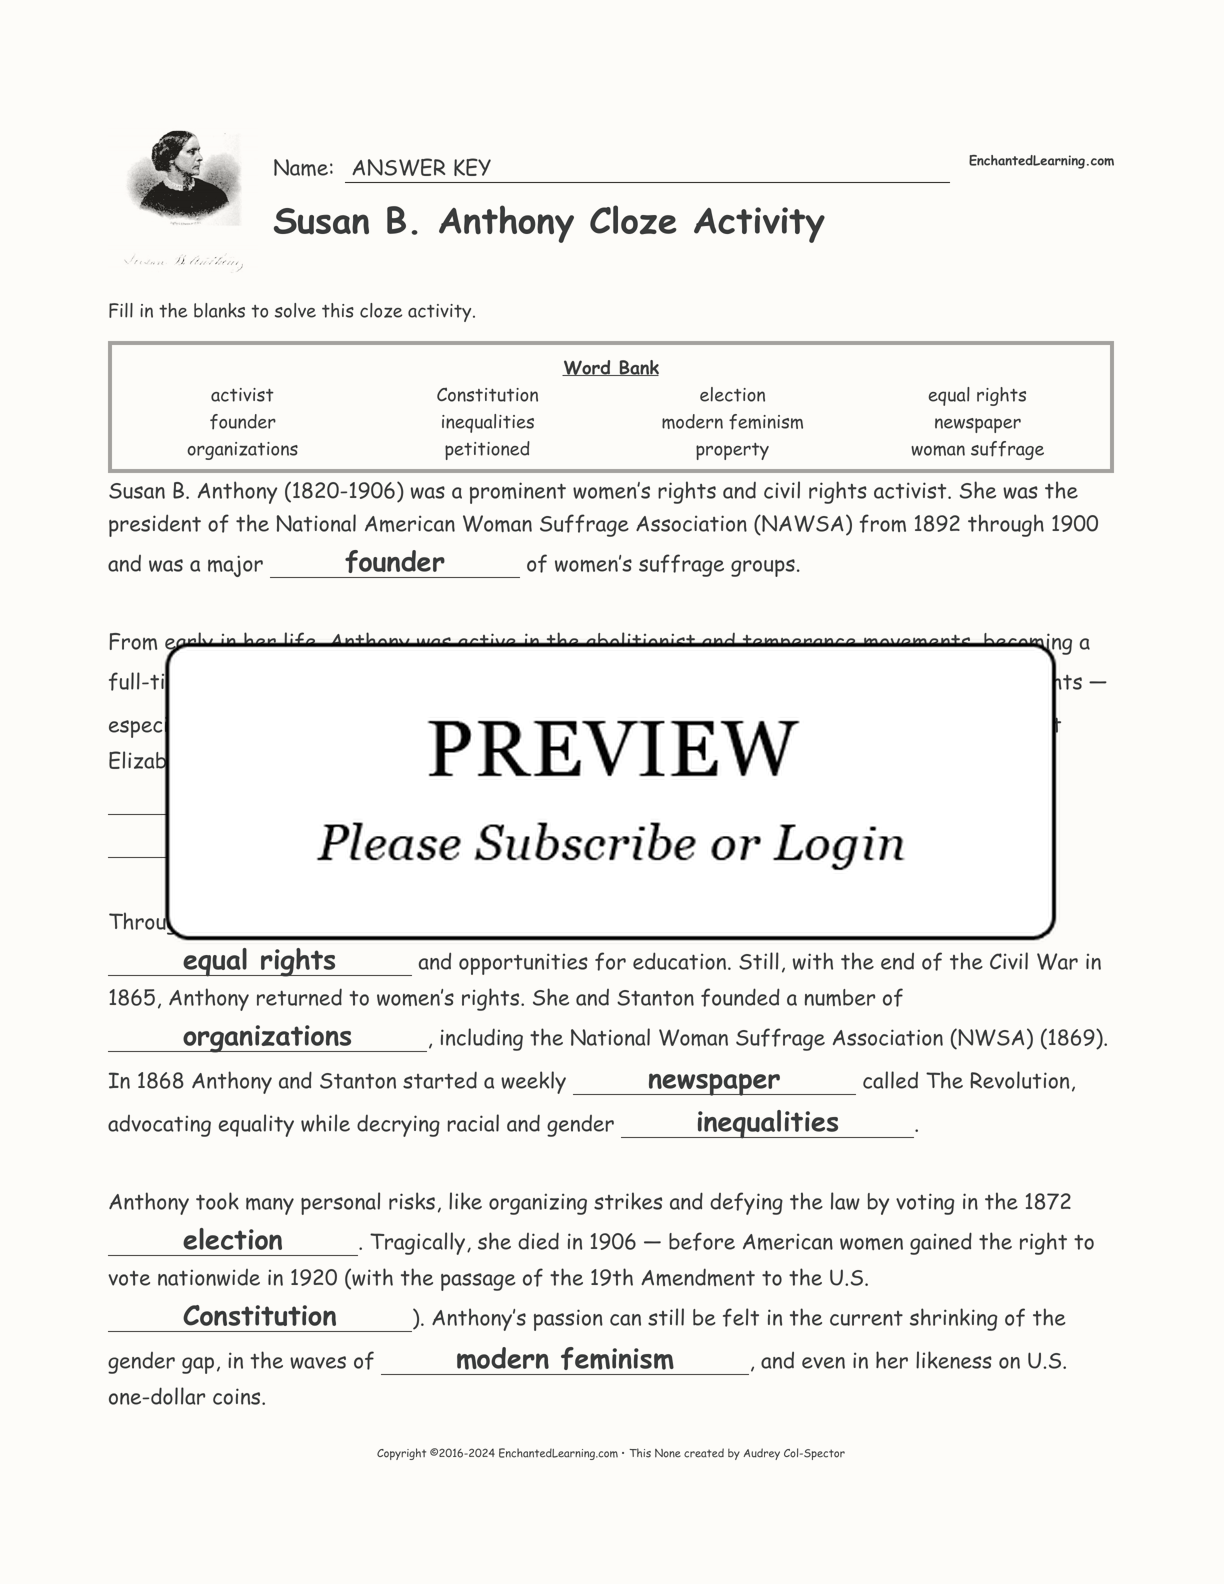 Susan B. Anthony Cloze Activity interactive worksheet page 2